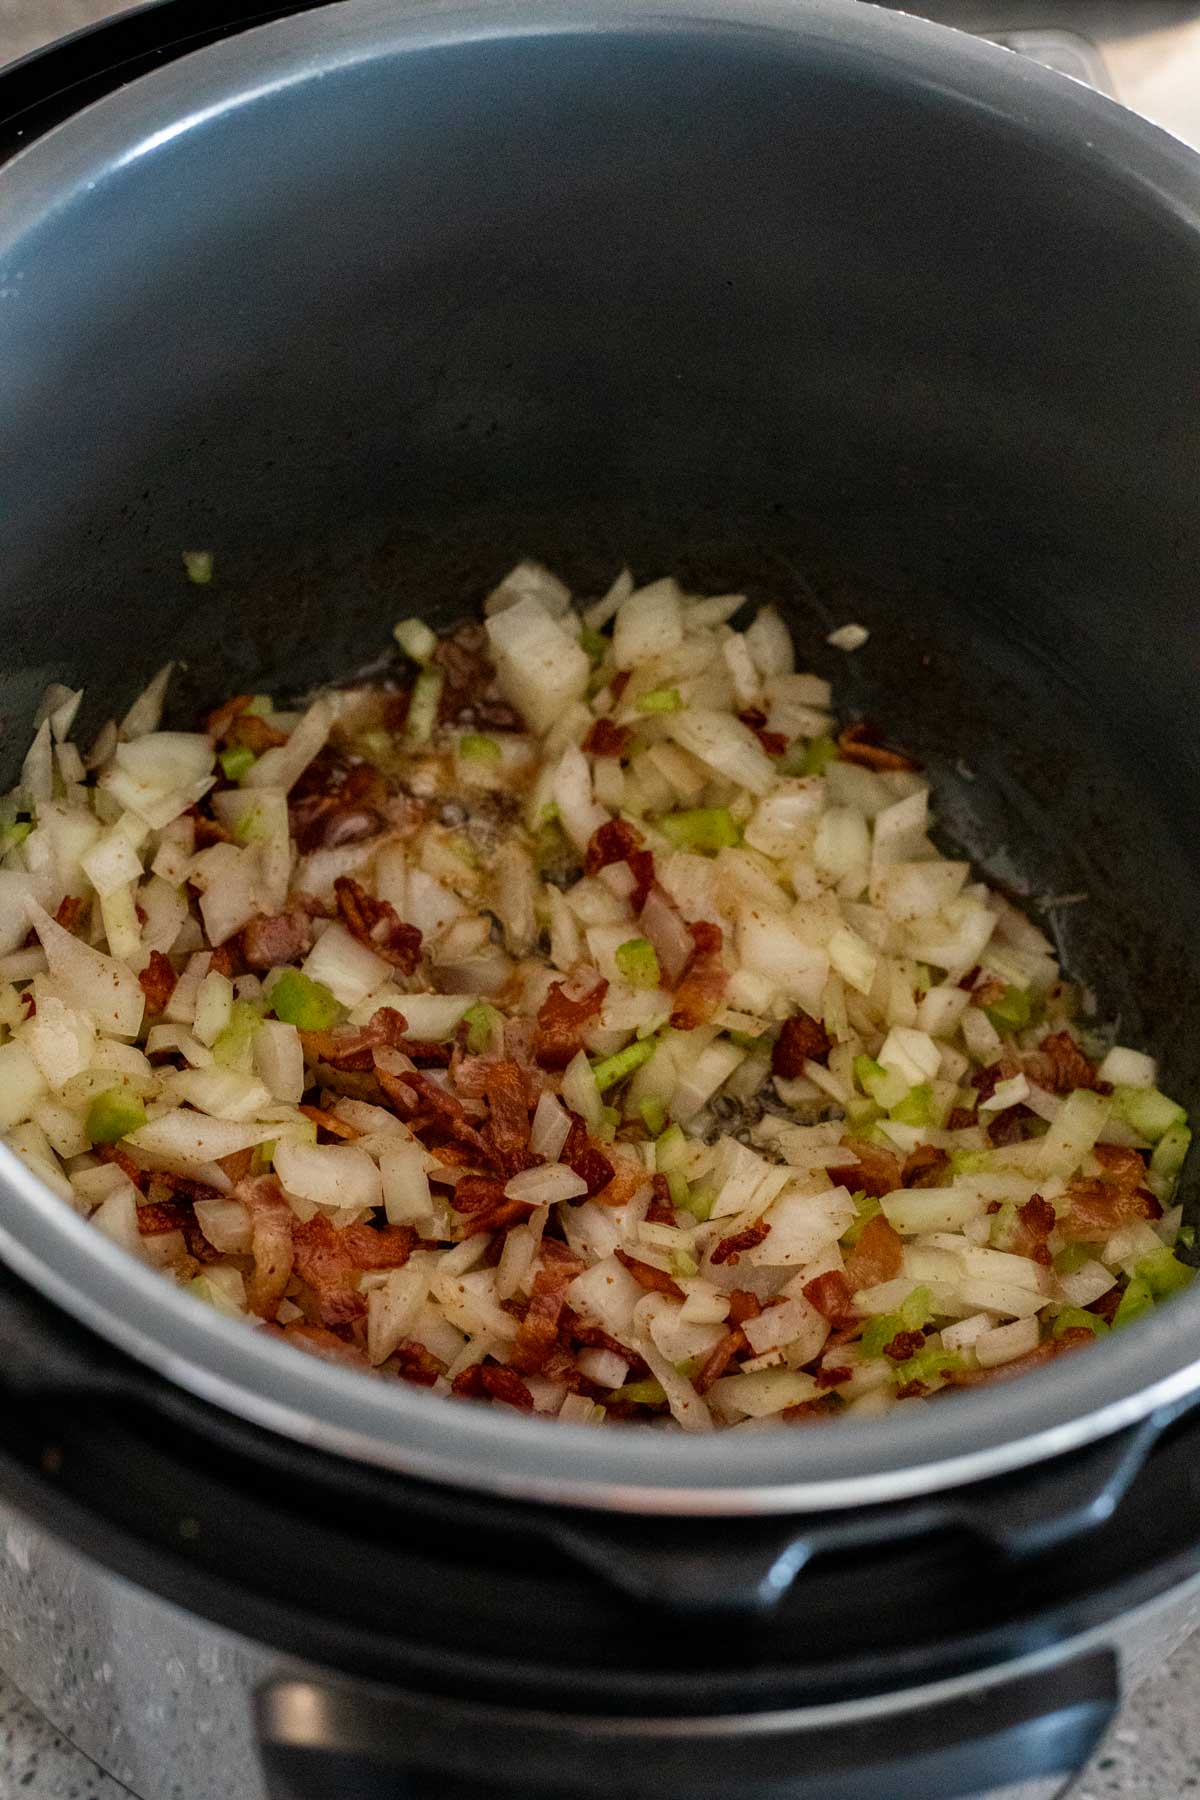 Onion, celery and bacon in the Instant Pot insert.